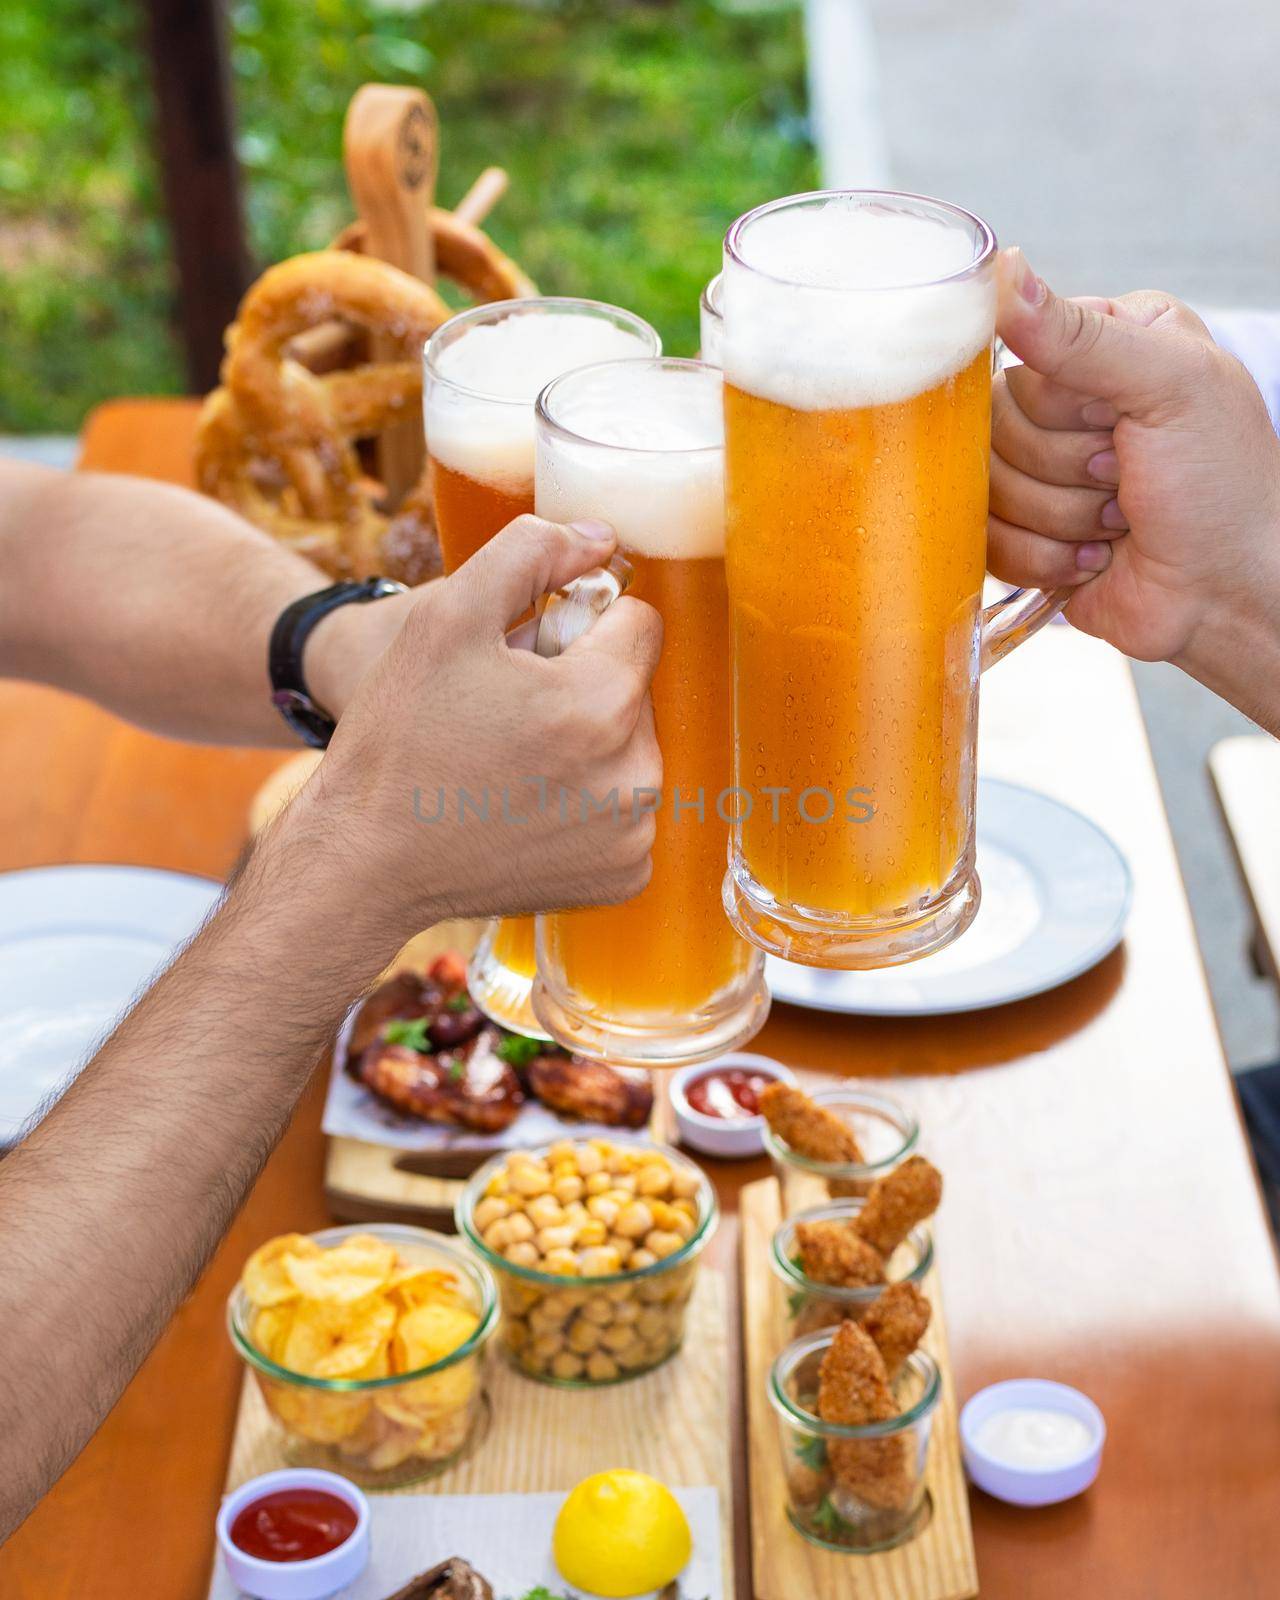 Clinking beer mugs outside, snacks on the table